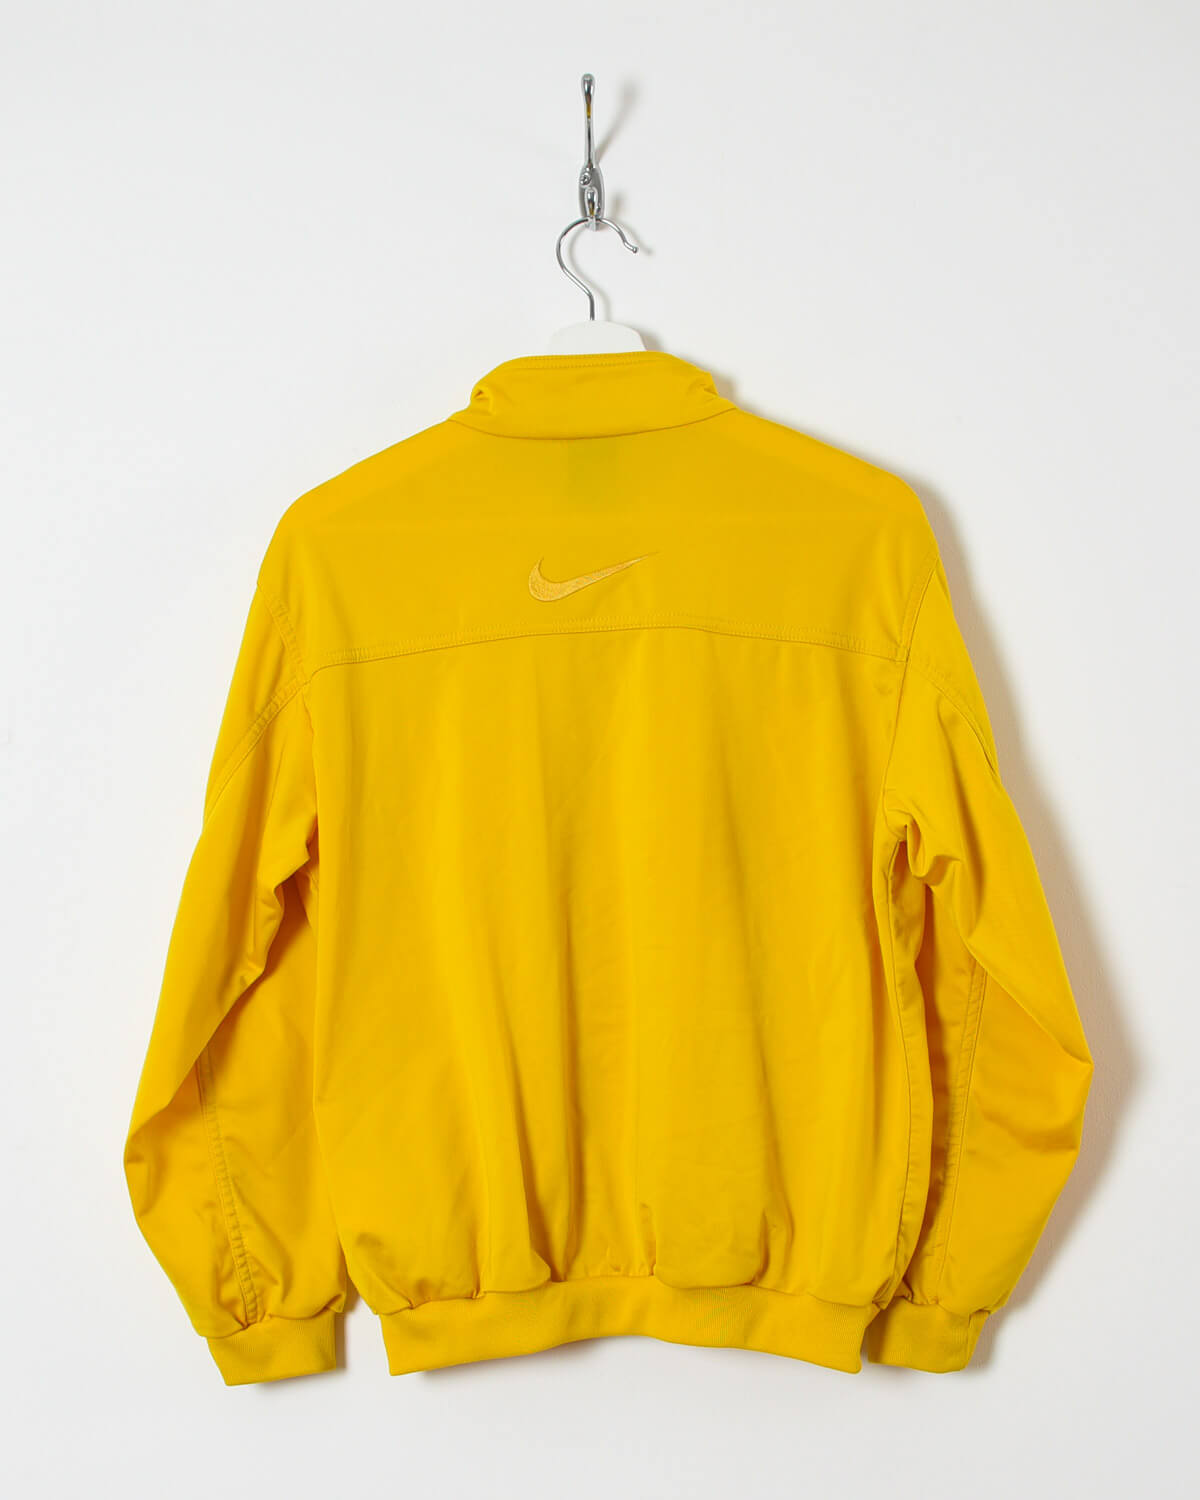 Nike Tracksuit Top - Small - Domno Vintage 90s, 80s, 00s Retro and Vintage Clothing 